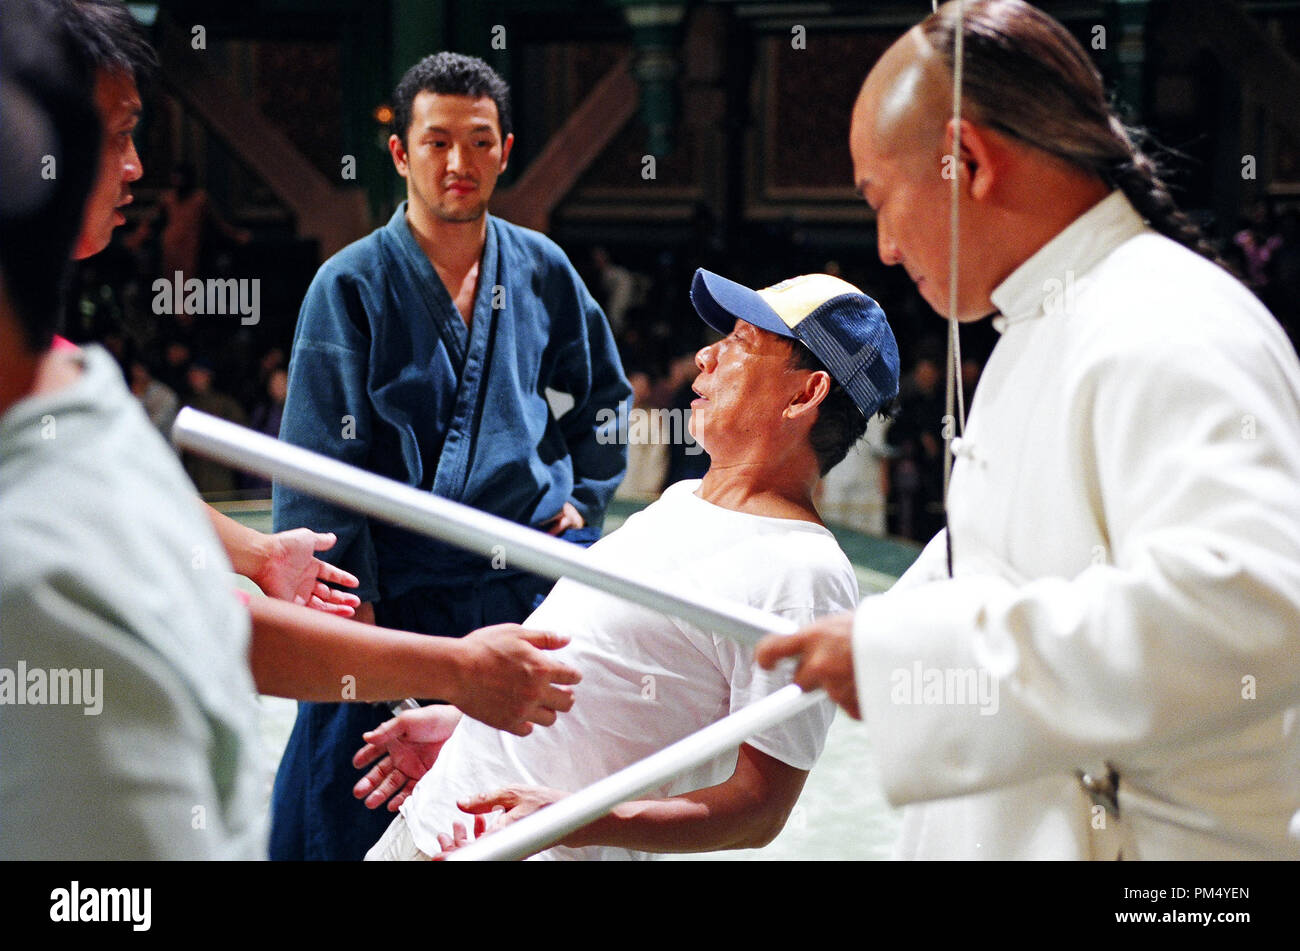 Film Still / Publicity Still from 'Fearless' Shido Nakamura, Woo-ping Yuen, Jet Li © 2006 Rogue Pictures Photo Credit: Chen Jinquan   File Reference # 30737400THA  For Editorial Use Only -  All Rights Reserved Stock Photo